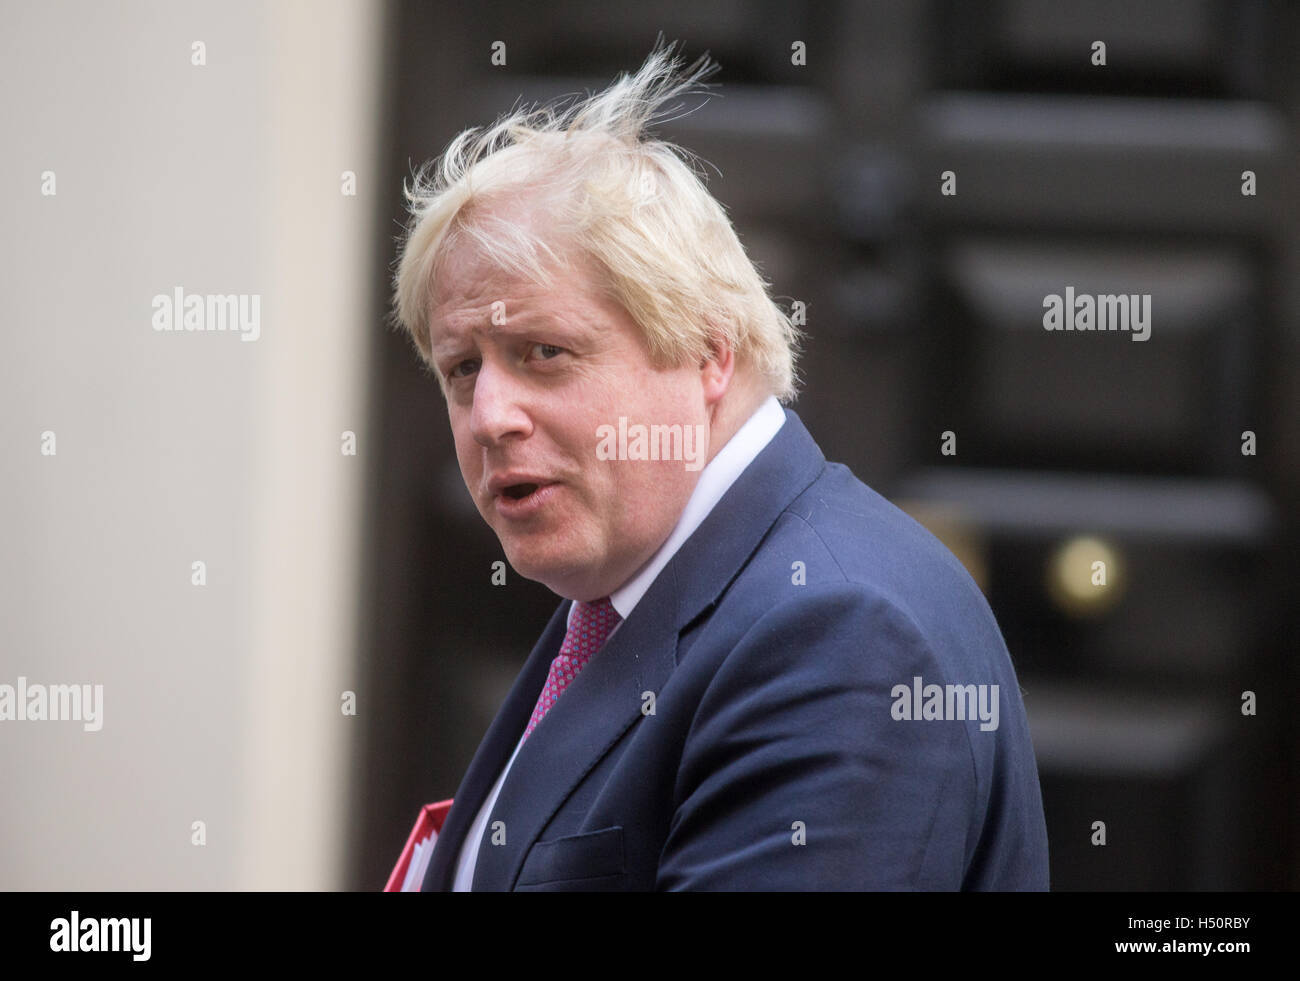 Boris Johnson,Foreign secretary and MP for Uxbridge and South Ruislip,at Number 10 Downing Street for a Cabinet meeting Stock Photo